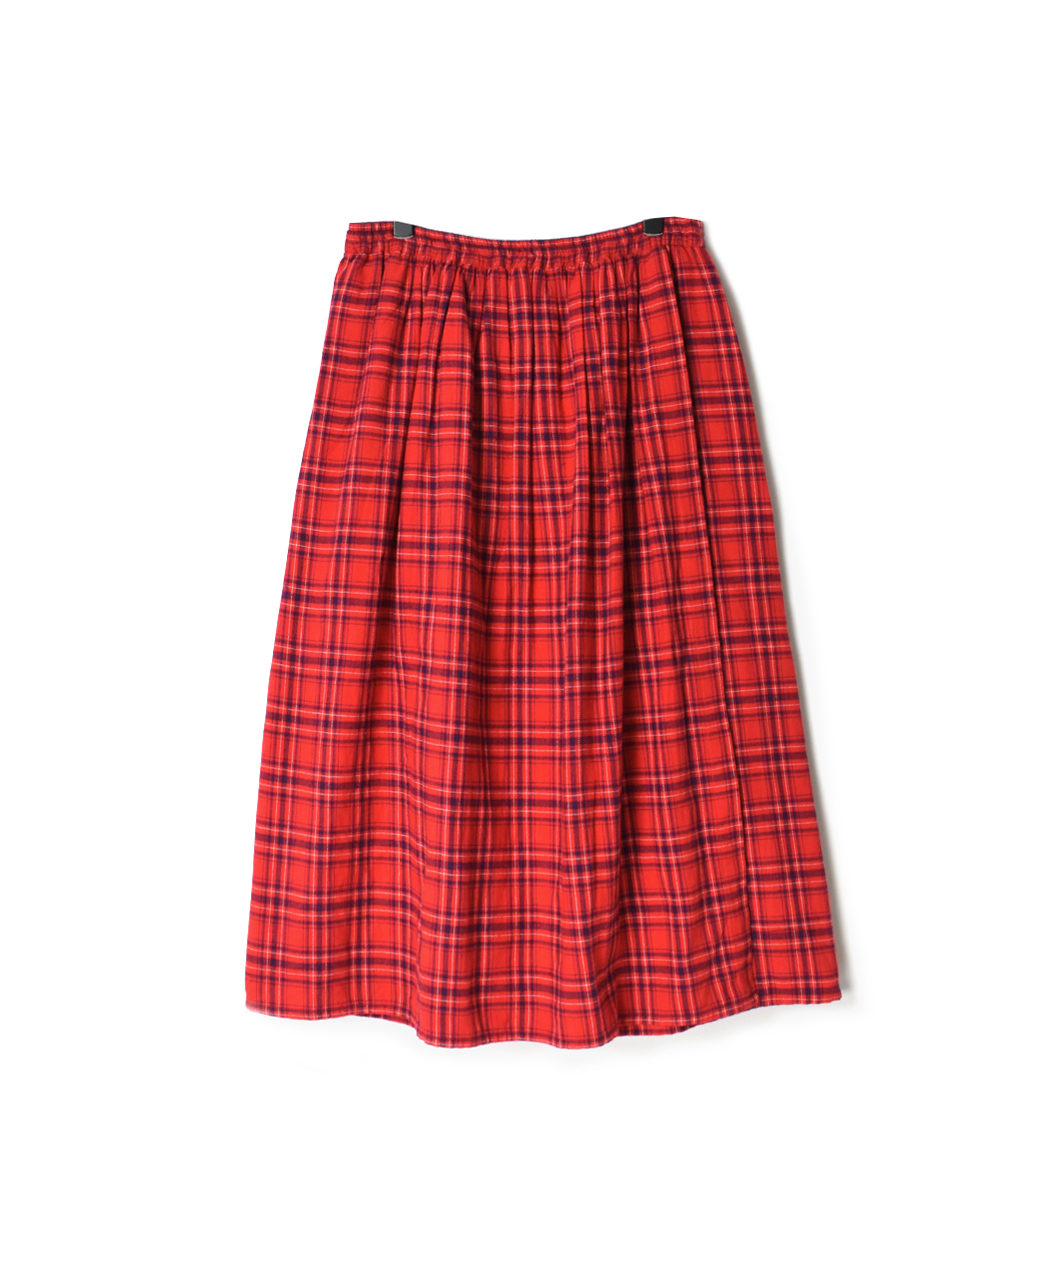 NSL20555 COTTON FLANNEL YARN DYED CHECK GATHERED WRAP SKIRT